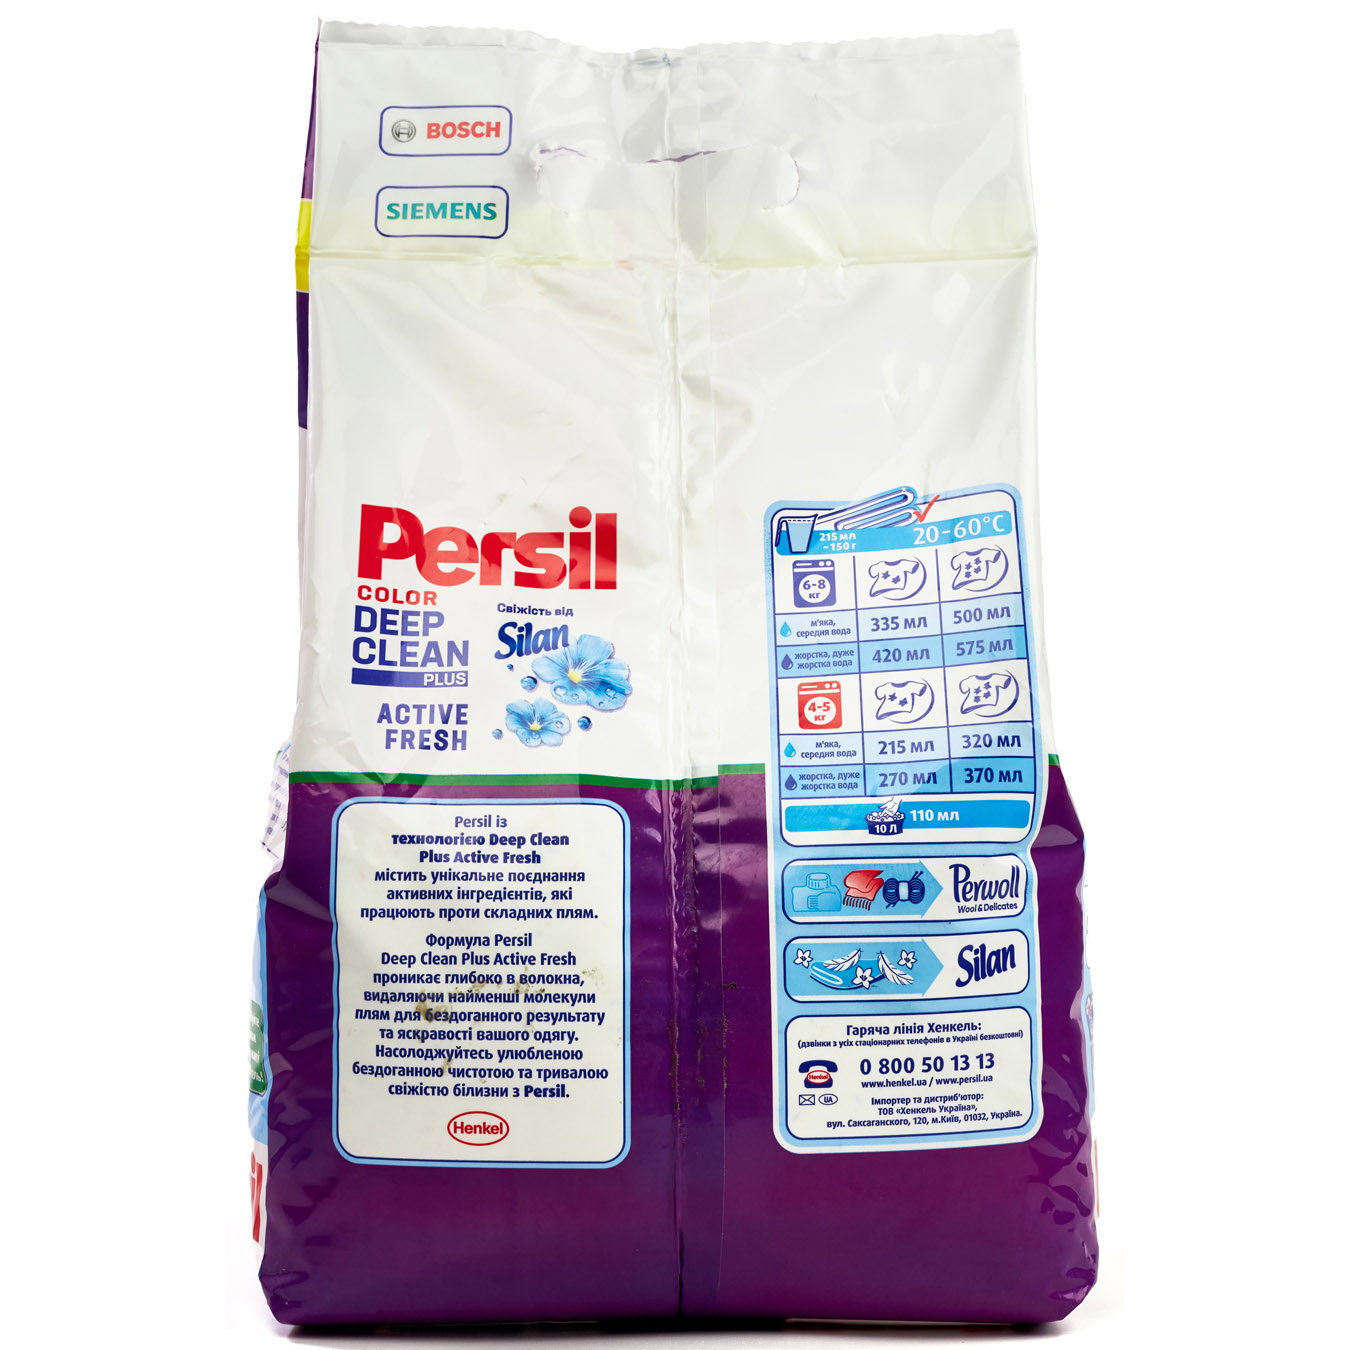 Persil Automatic Machine Color Freshness from Silan Washing Powder 4050g 2